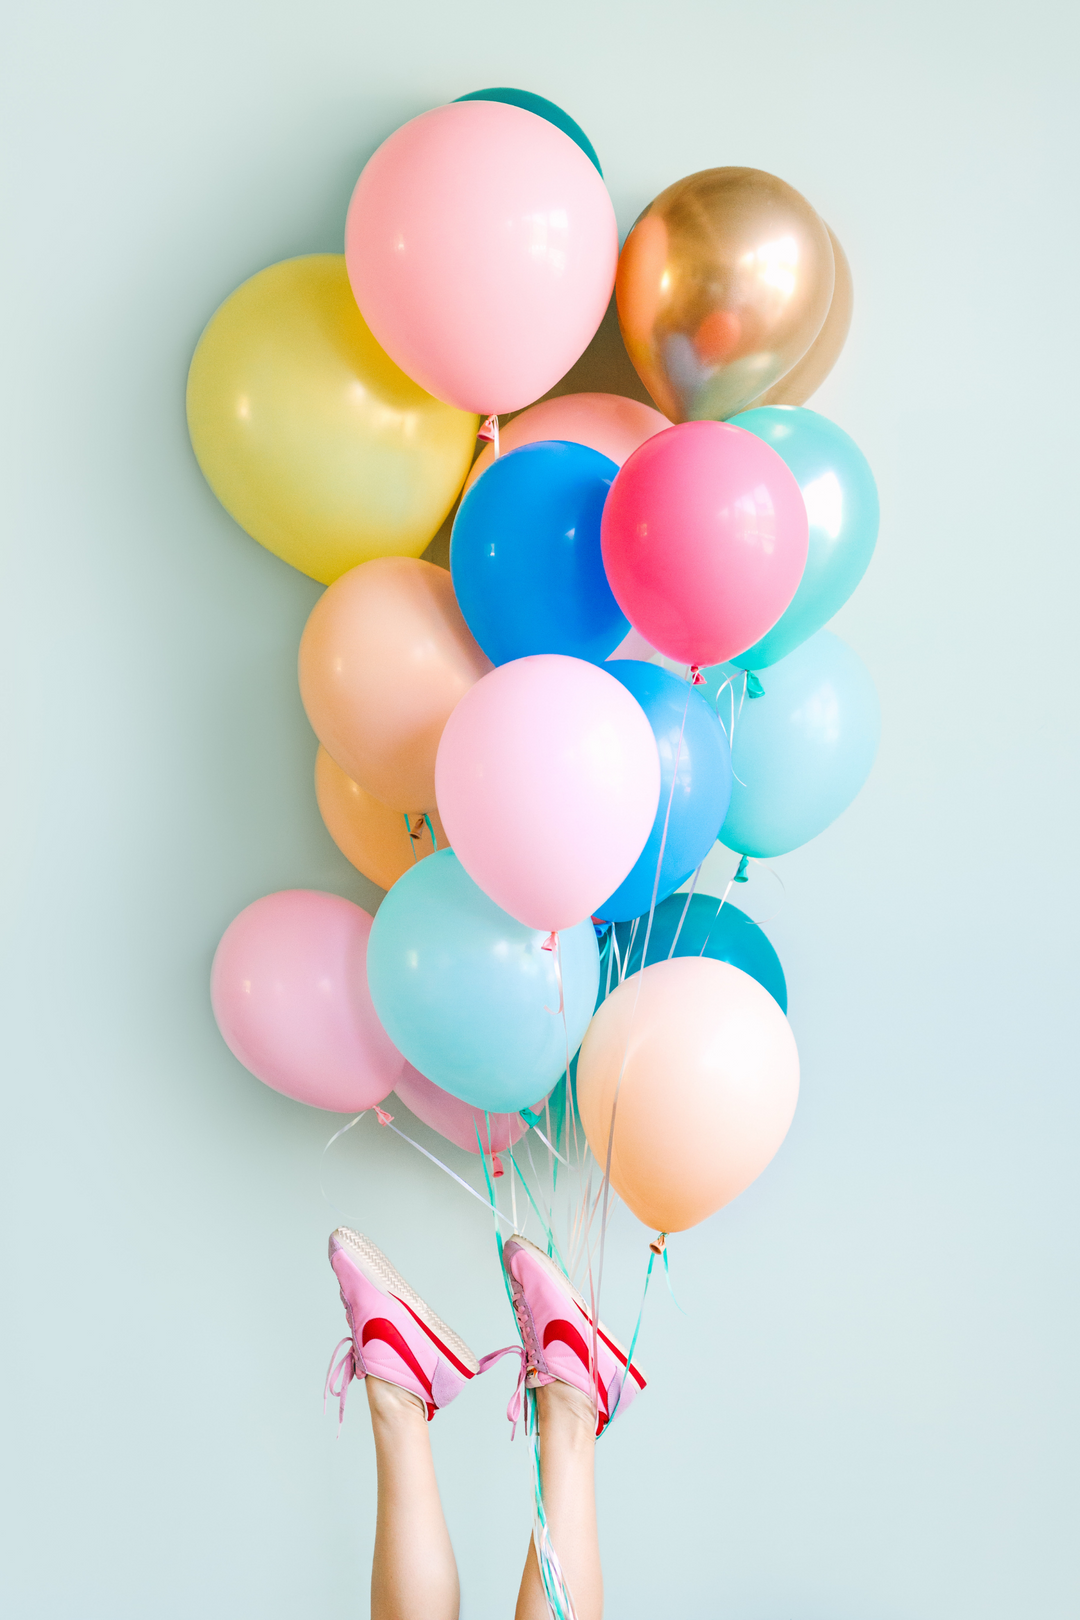 Balloon installation and deliveries in Los Angeles